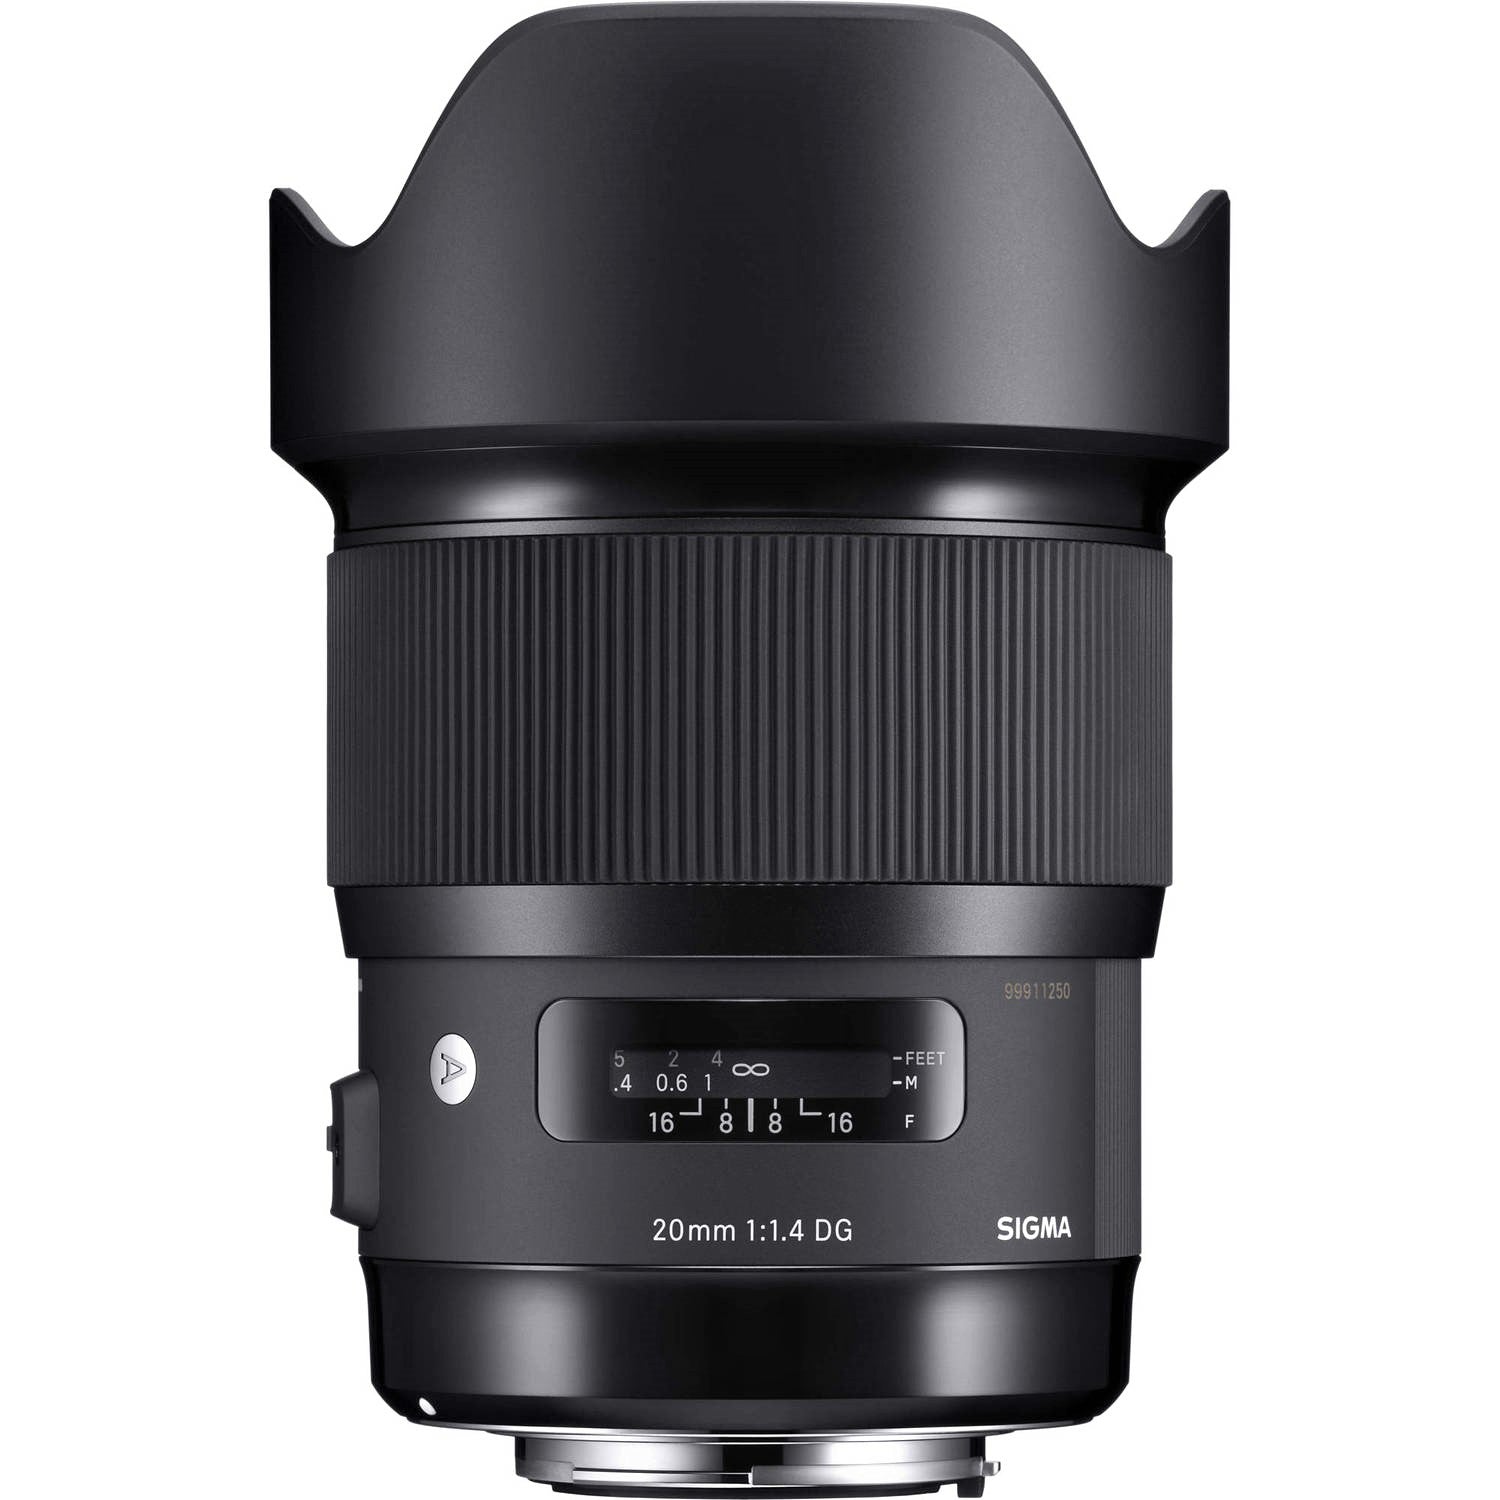 Sigma 20mm F1.4 DG HSM Art Lens for Canon EF with Attached Lens Hood on the Top